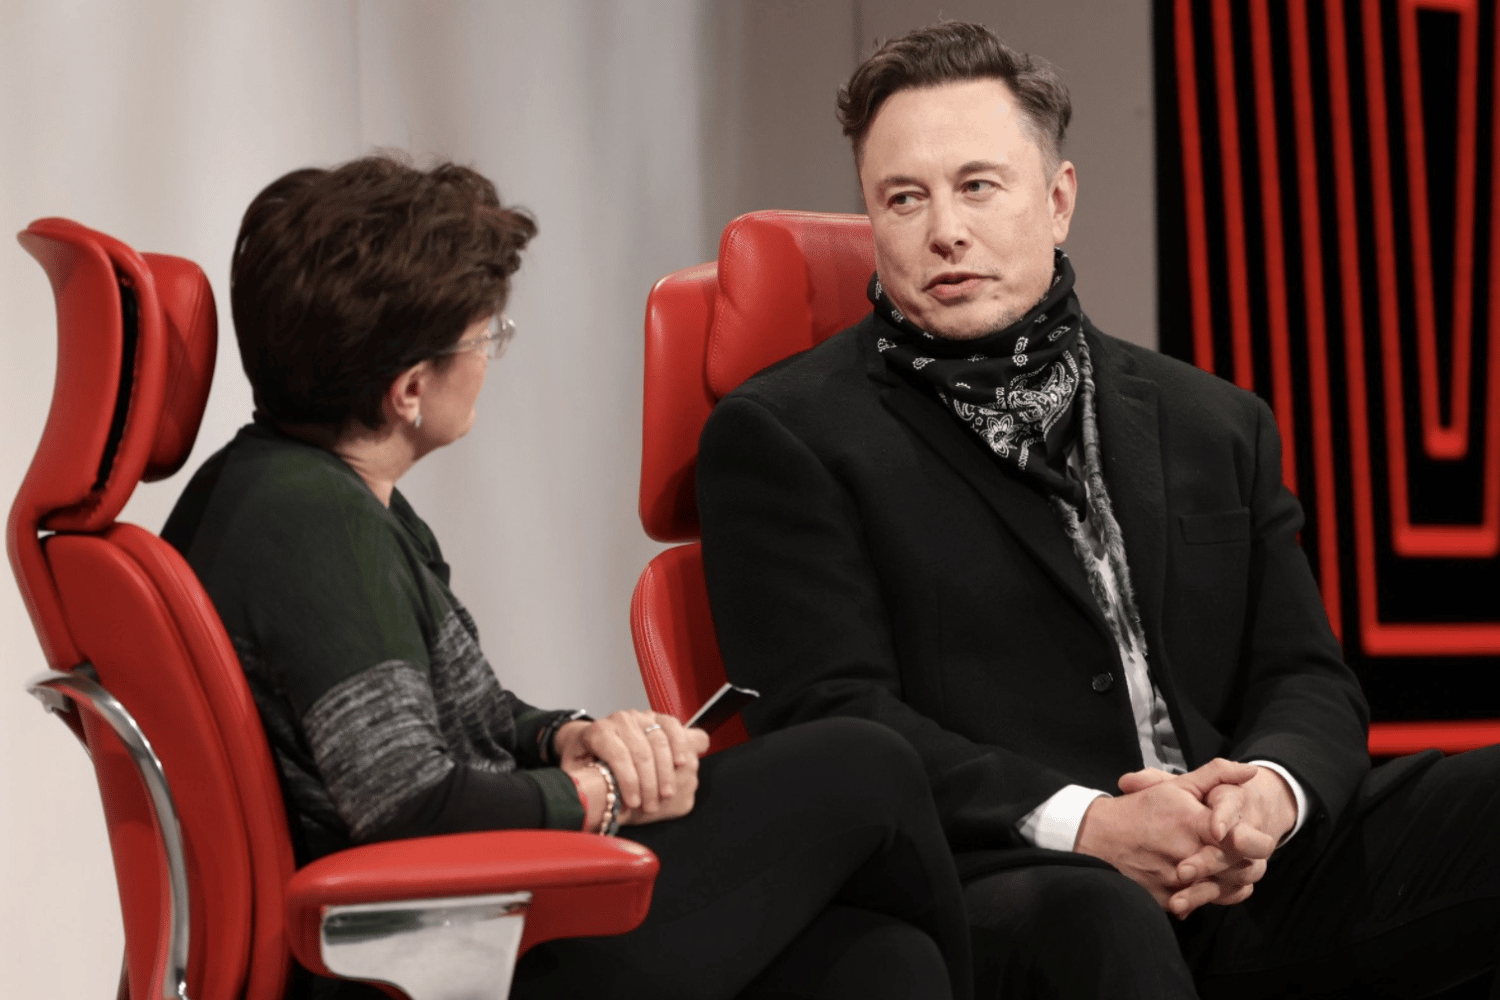 elon musk on twitter the genius tesla ceo engineer and business magnate